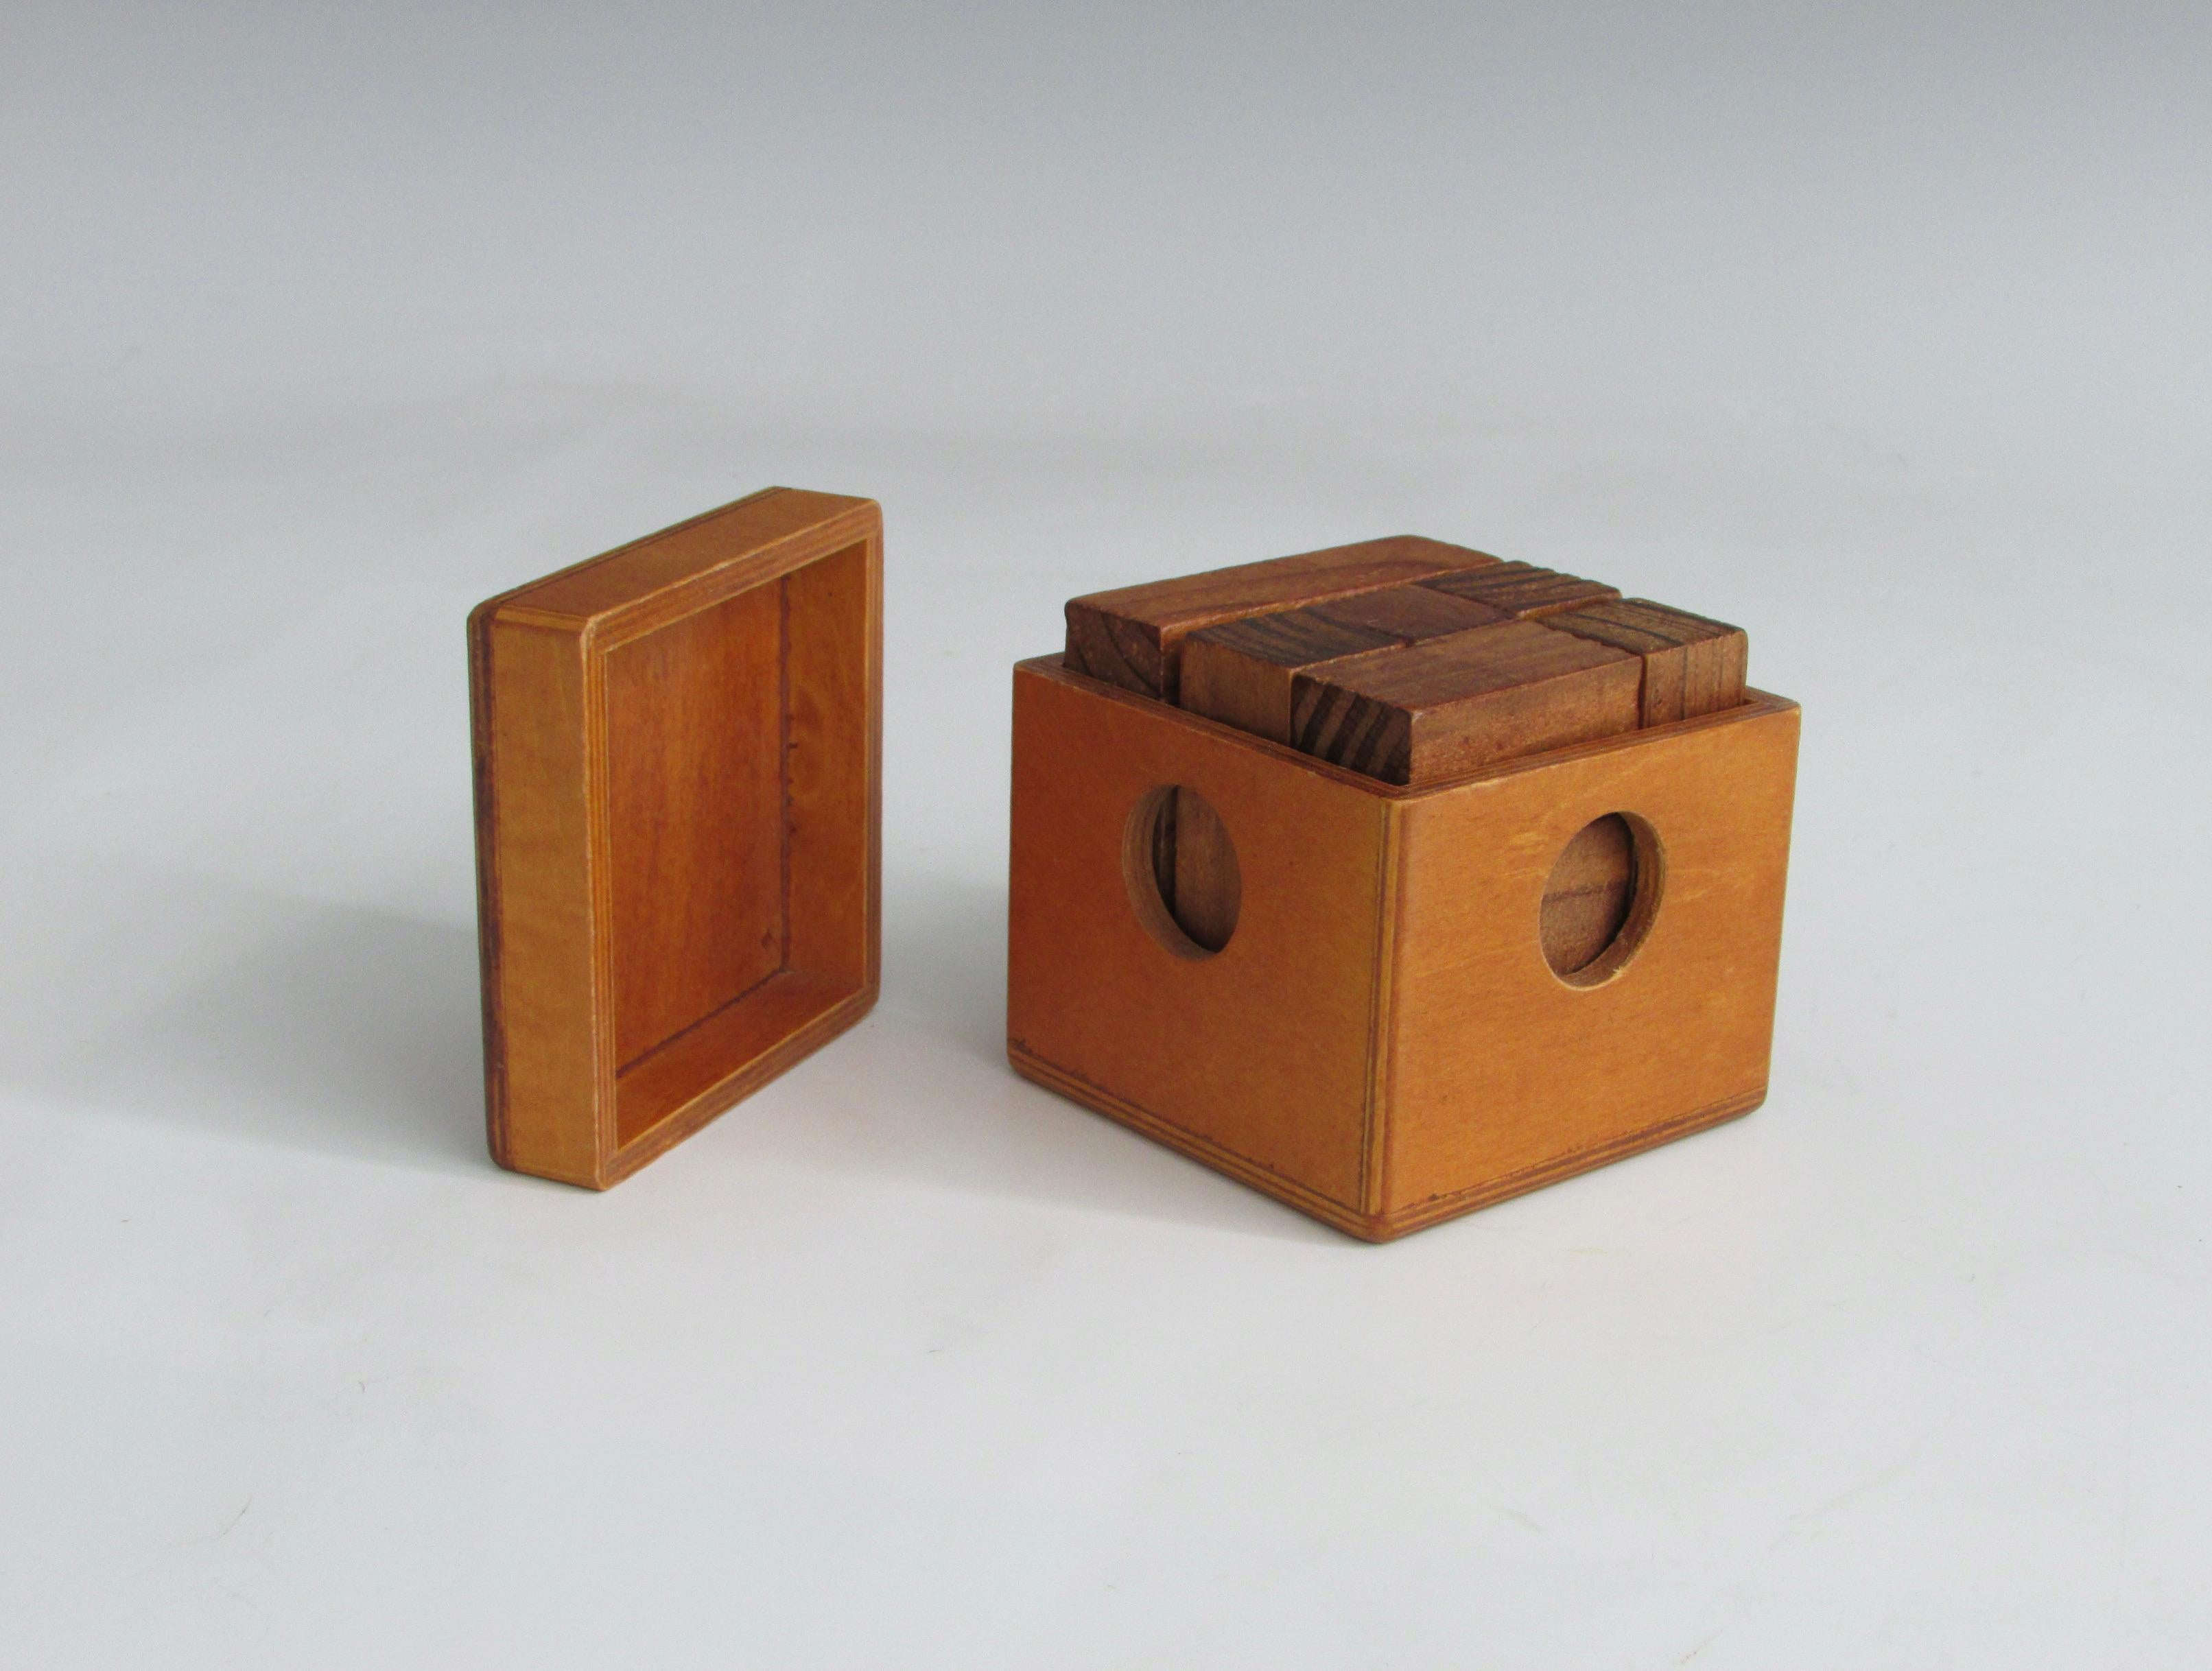 Geometric pieces of wood fitted together inside of laminate or plywood box.